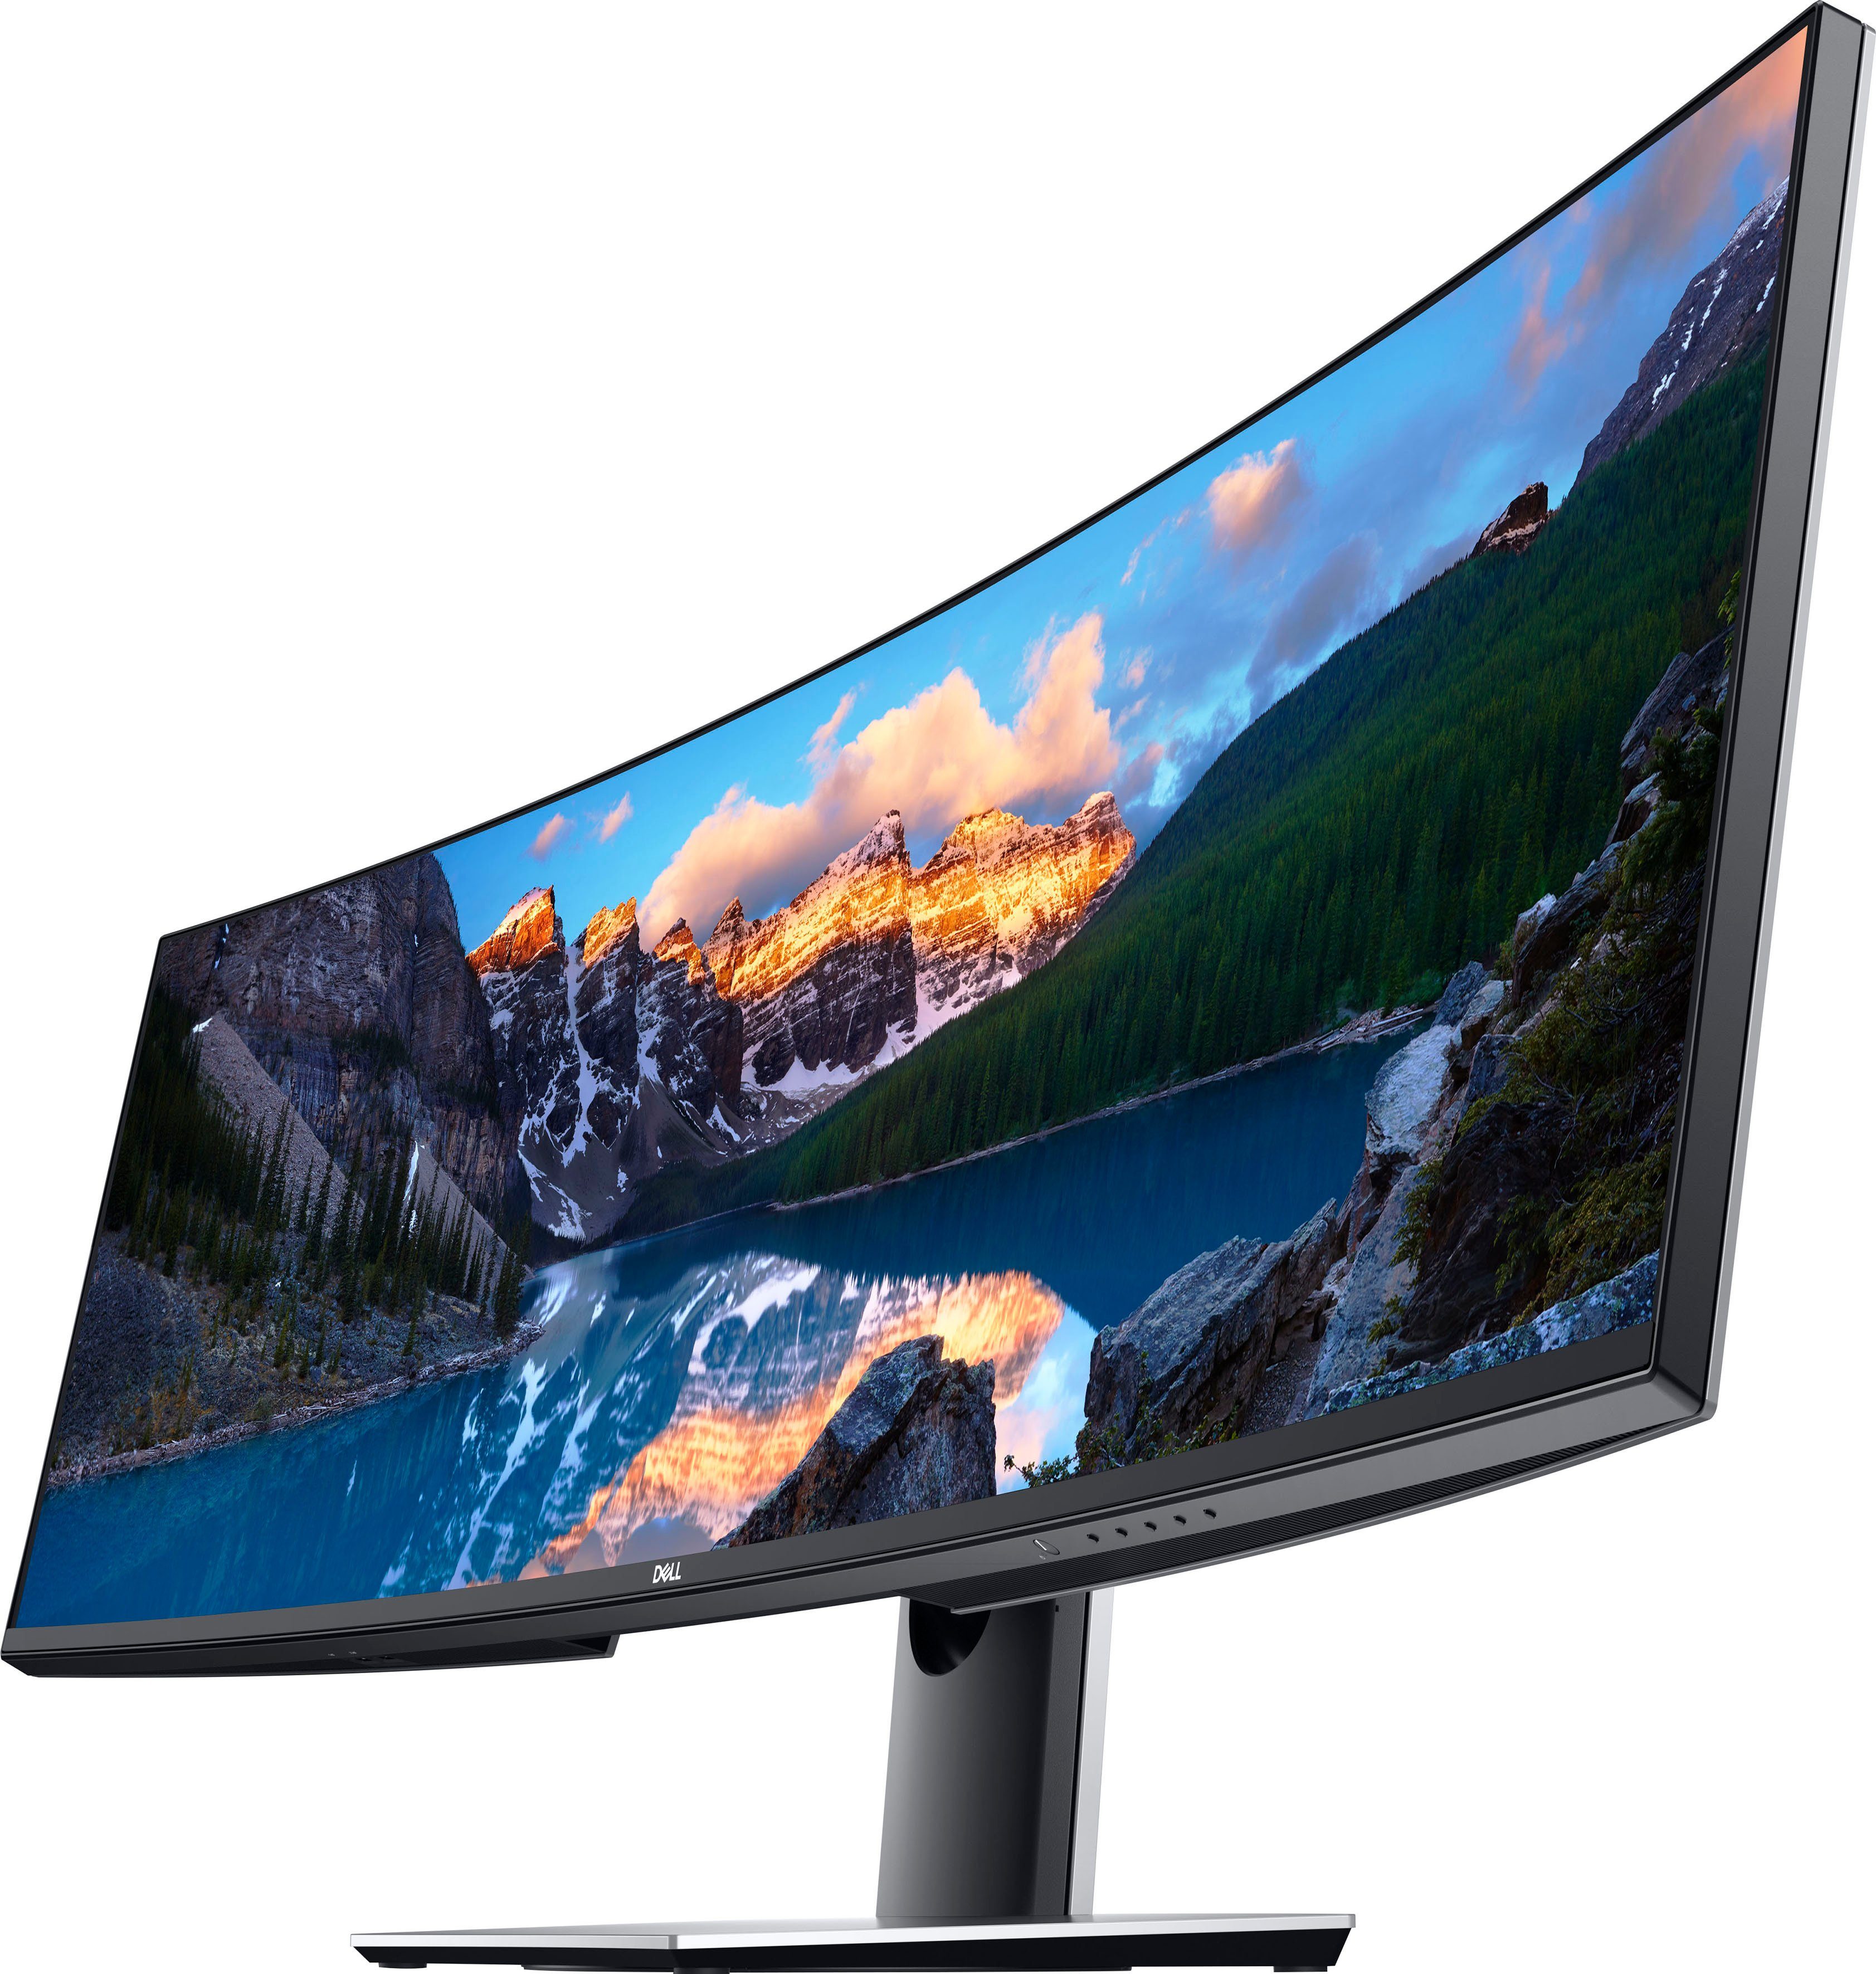 Dell U4919DW Curved-LED-Monitor (124,5 cm/49 ", 5120 x 1440 px, 5 ms Reaktionszeit, 60 Hz, LCD)